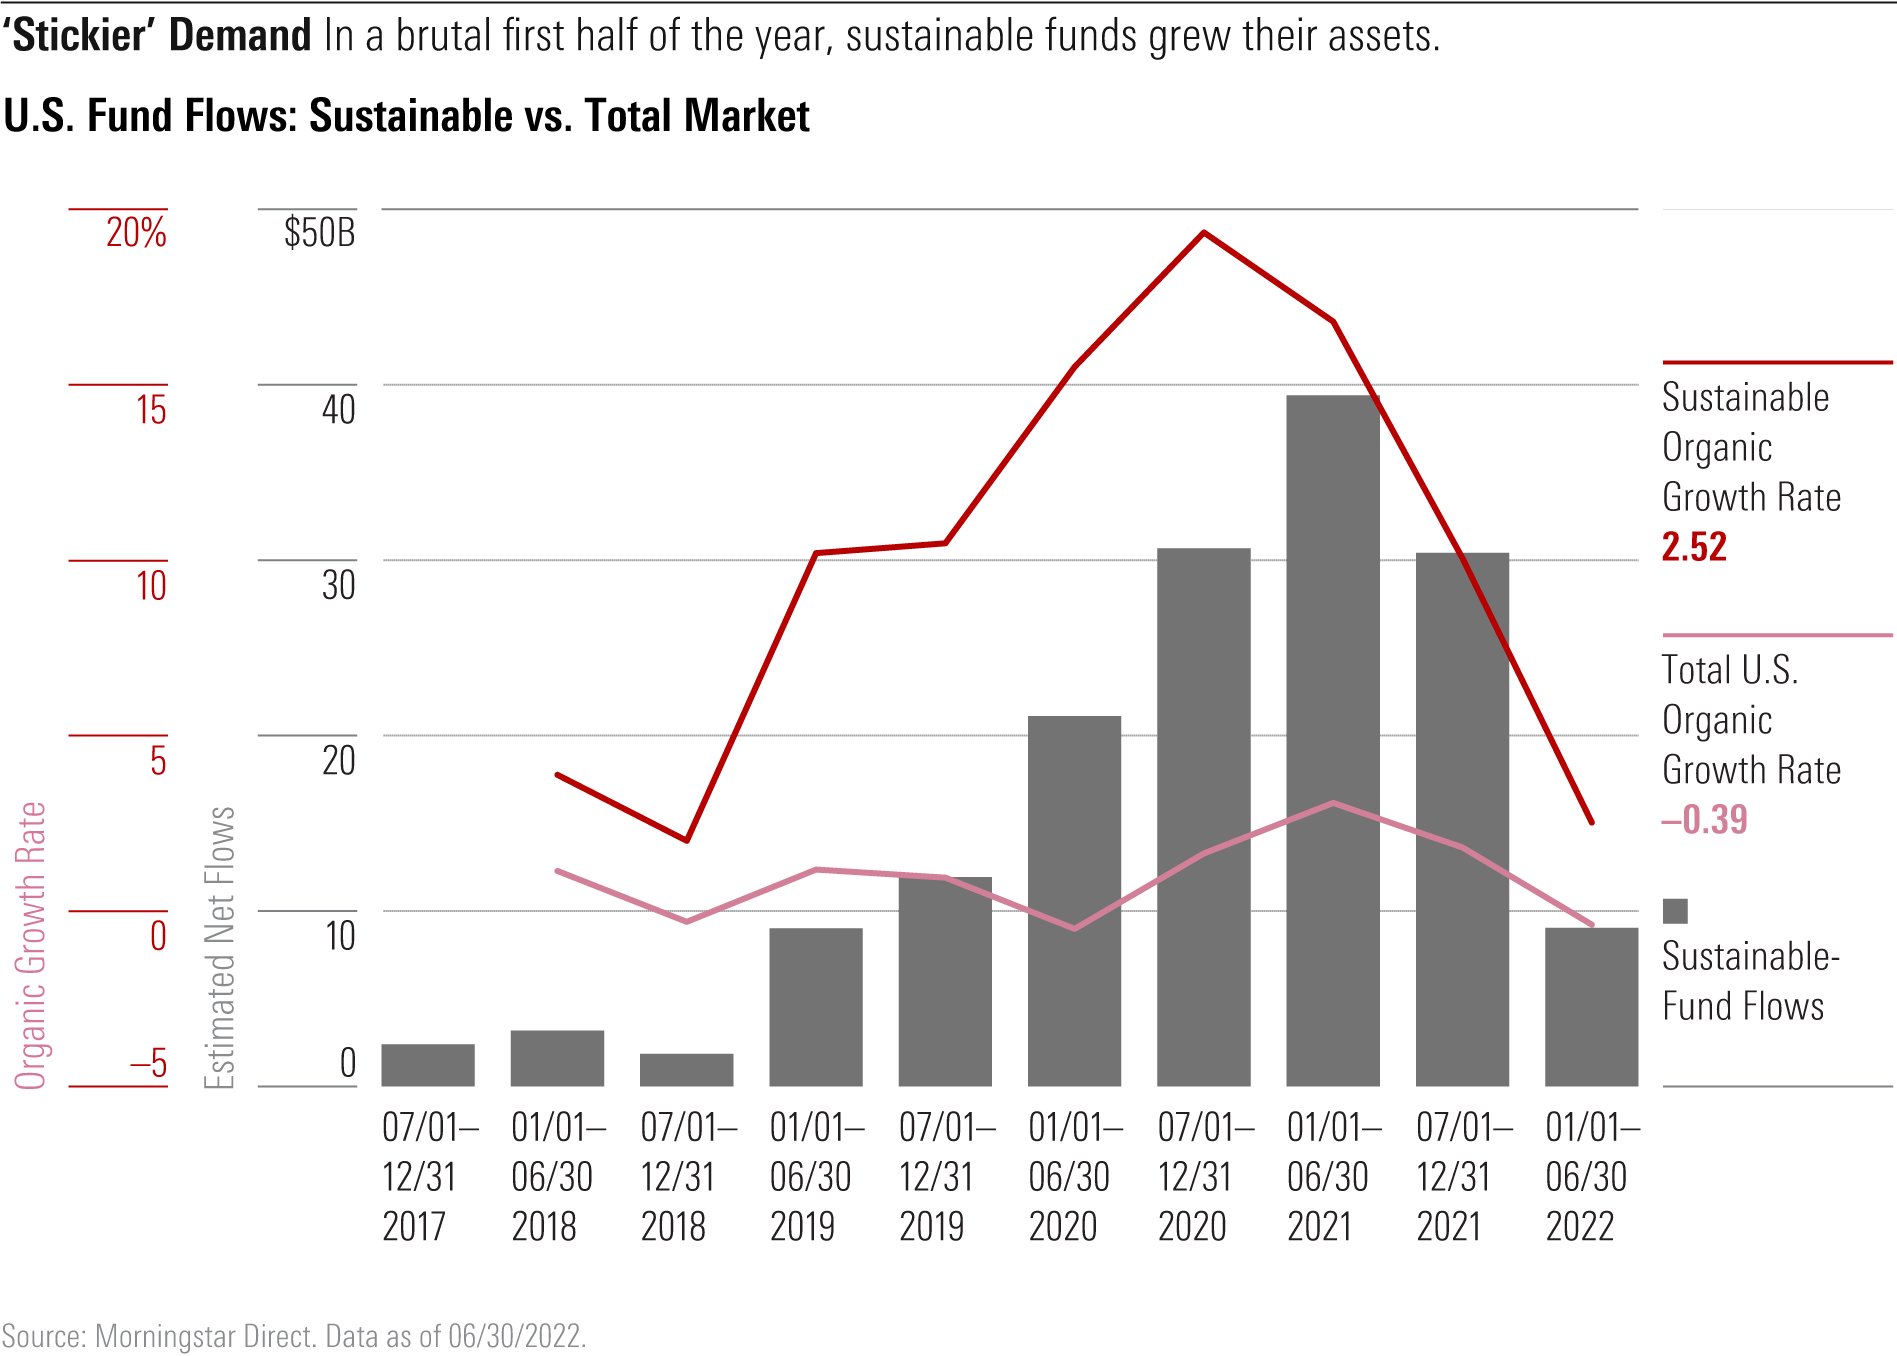 Chart shows that sustainable funds grew their assets during the first half of 2022.